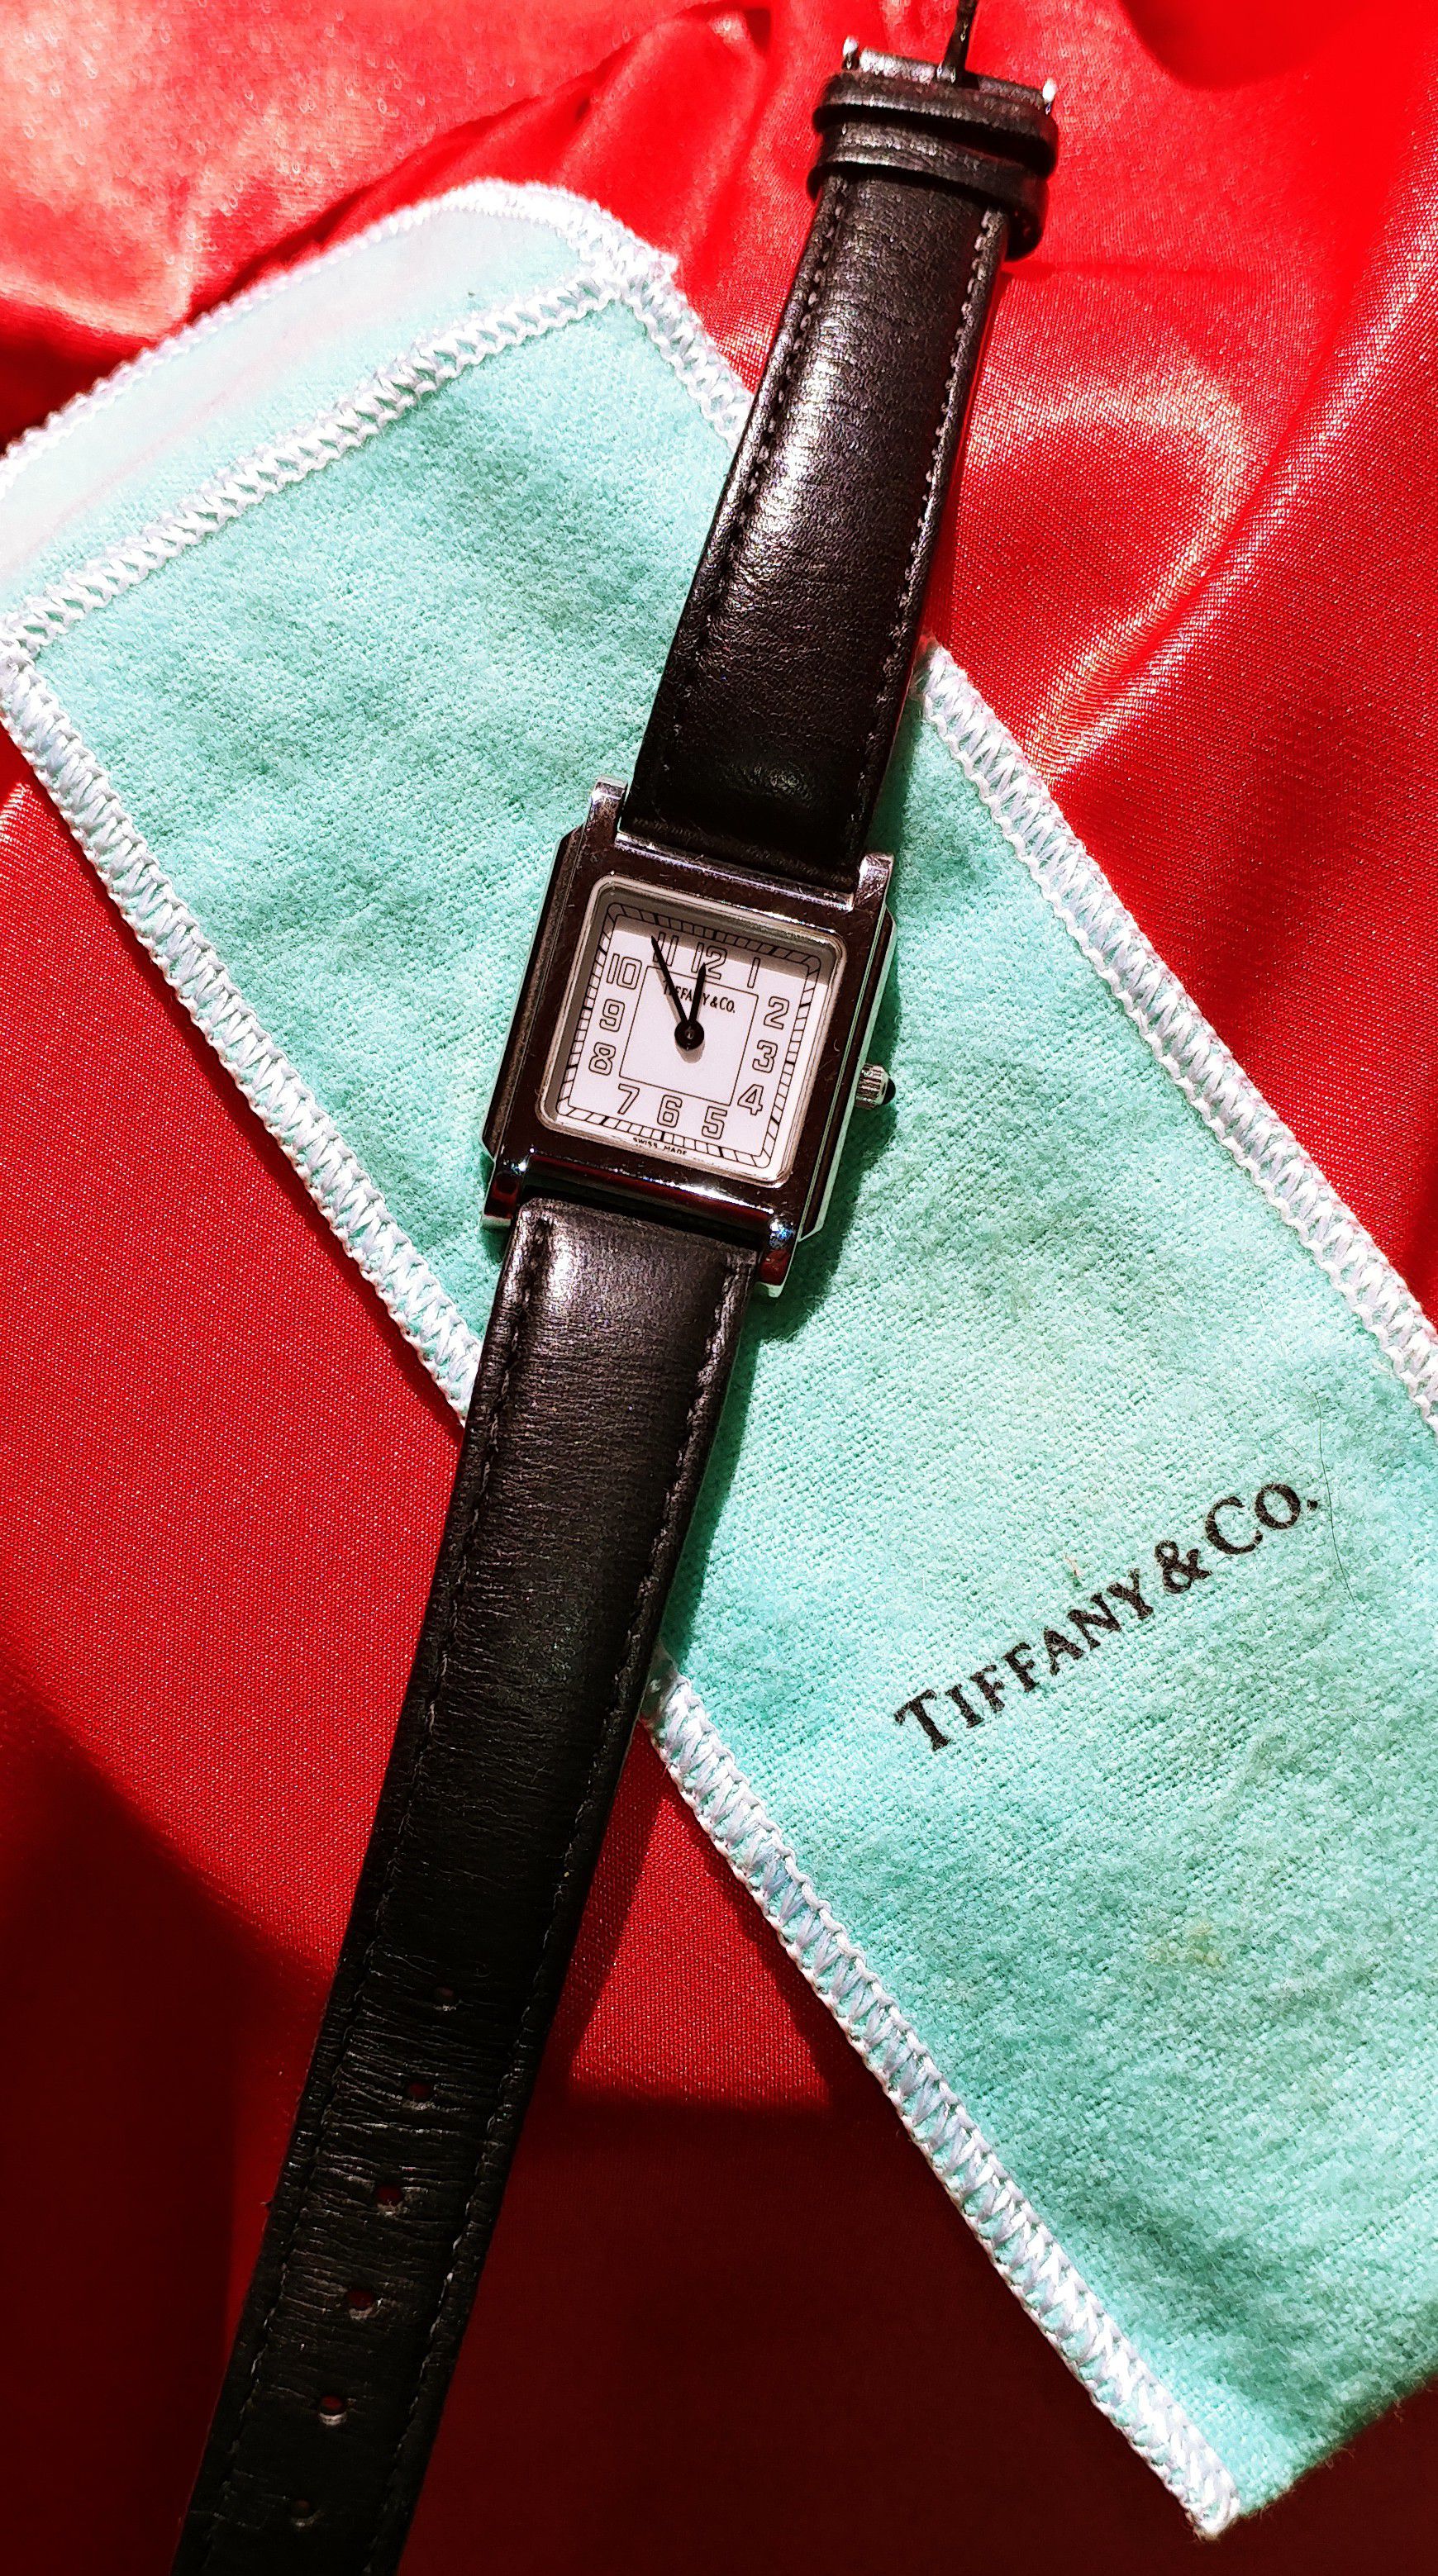 TIFFANY & CO authentic vintage watch